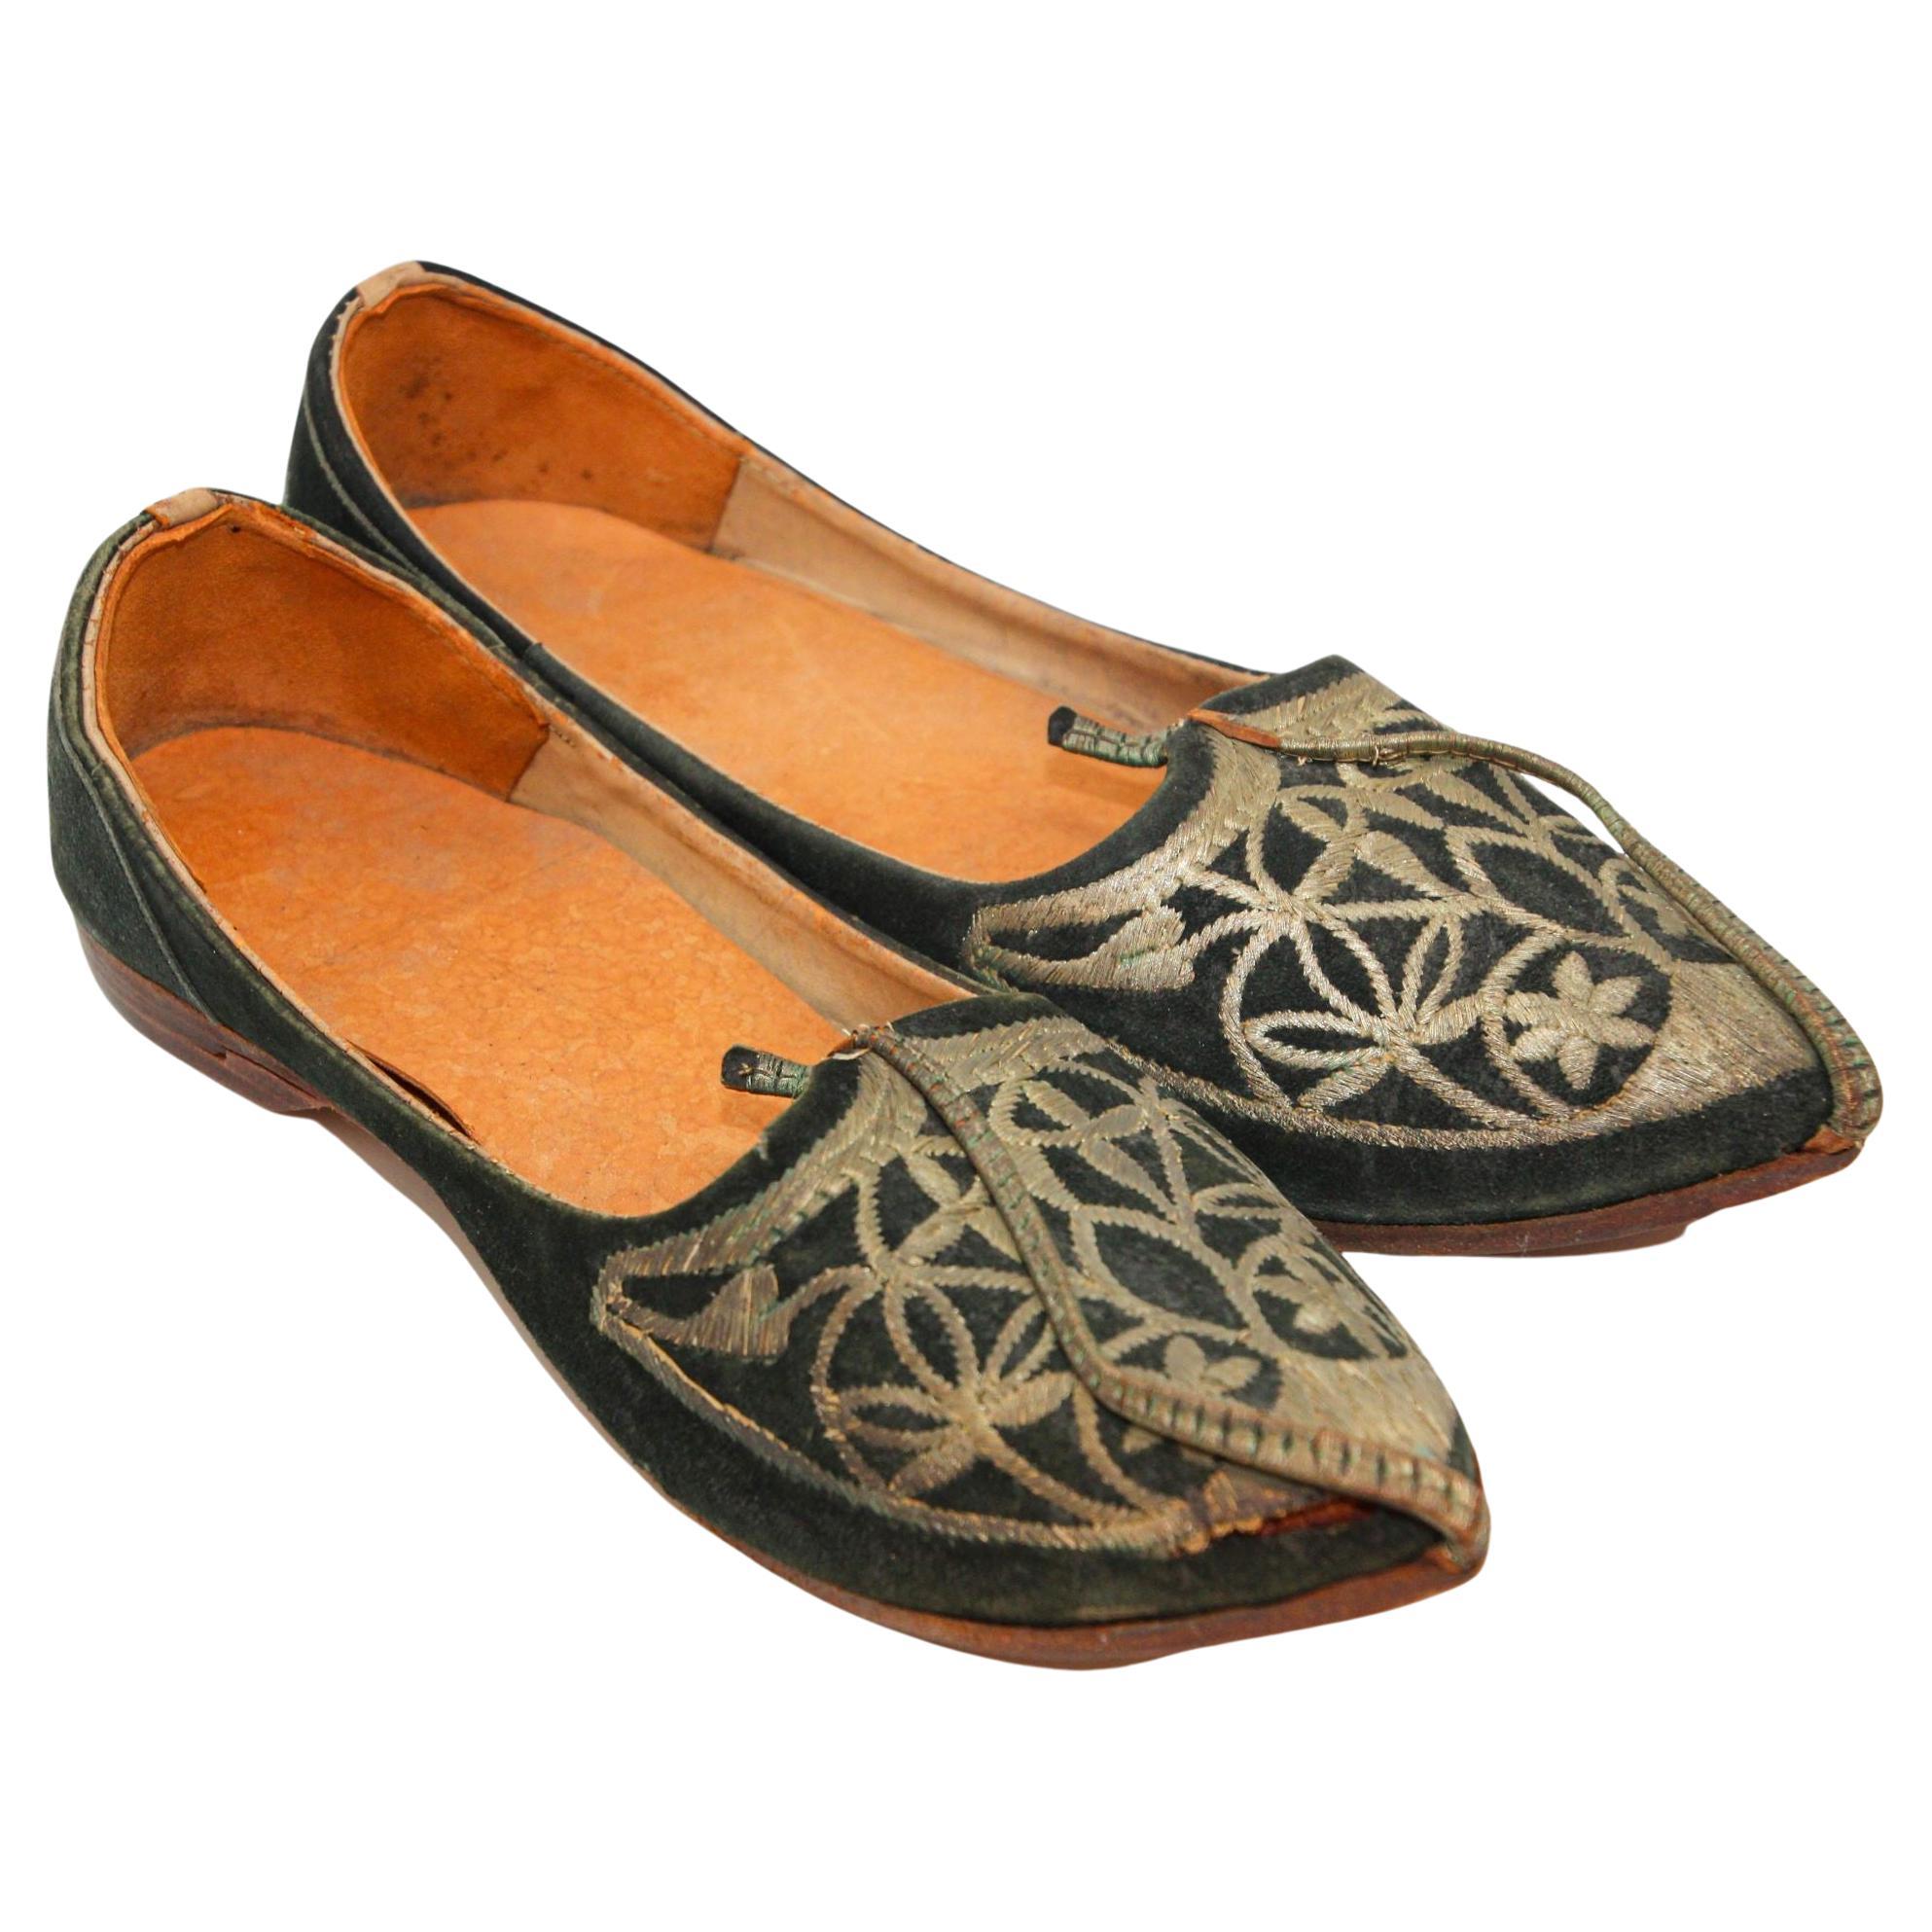 Moorish Mughal Style Curled Toe Black Leather Shoes from Tony Duquette Estate For Sale